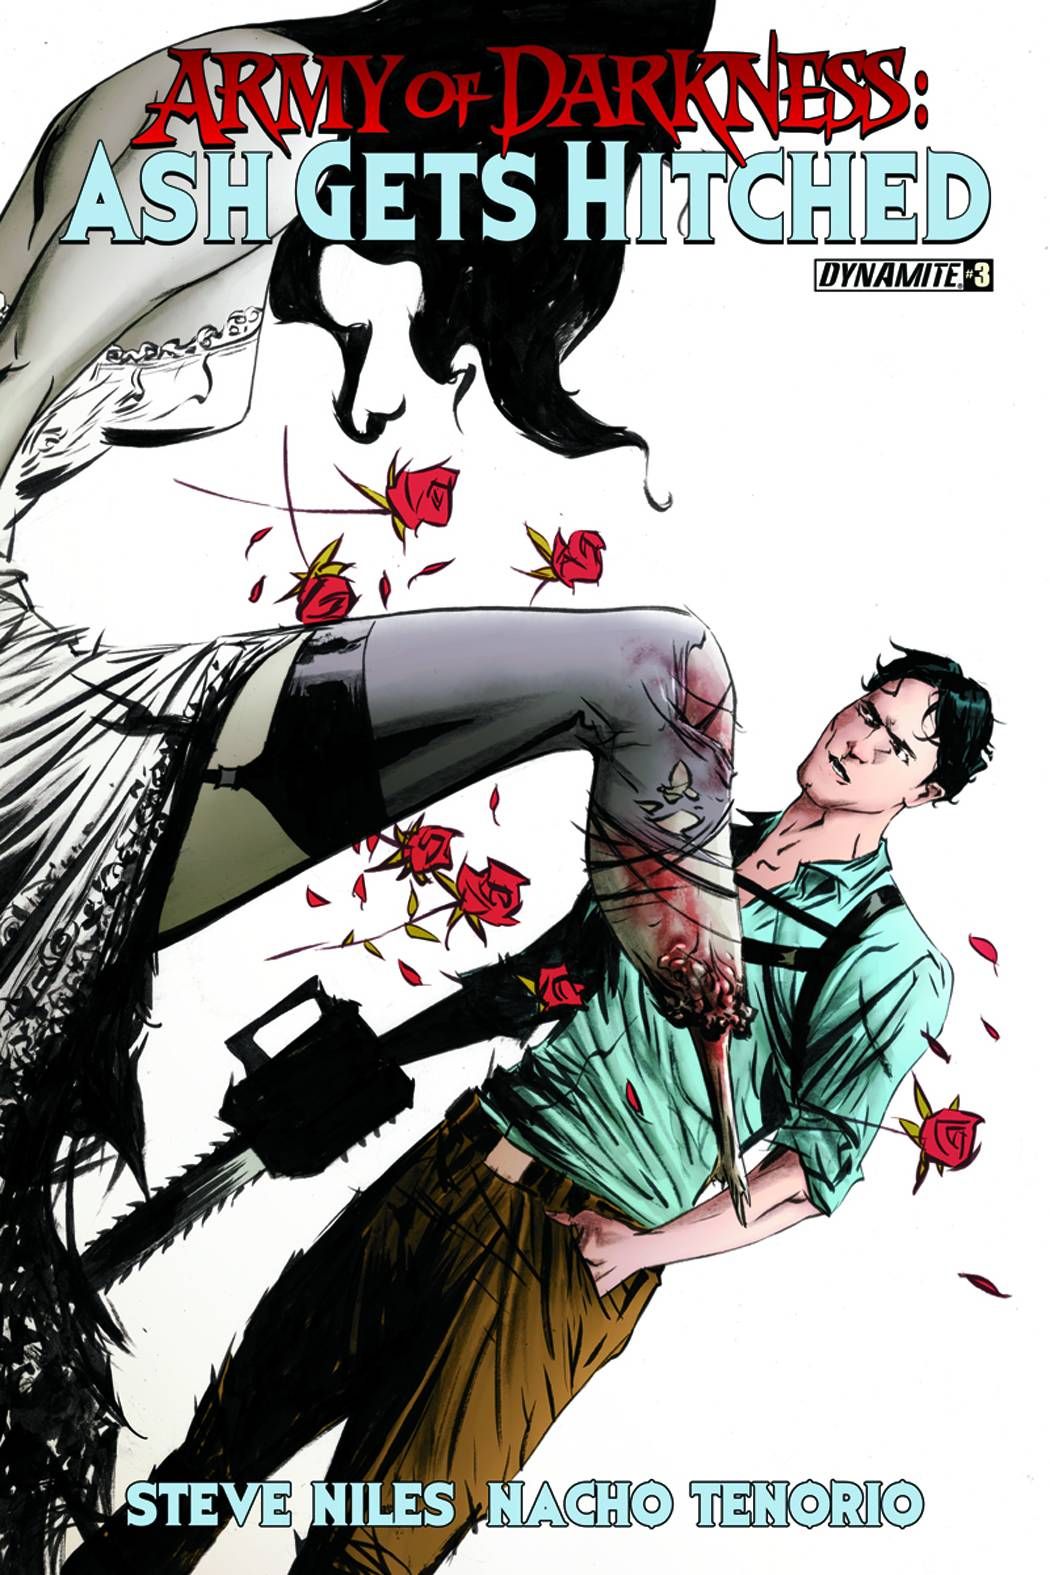 Army of Darkness: Ash Gets Hitched #3 Comic